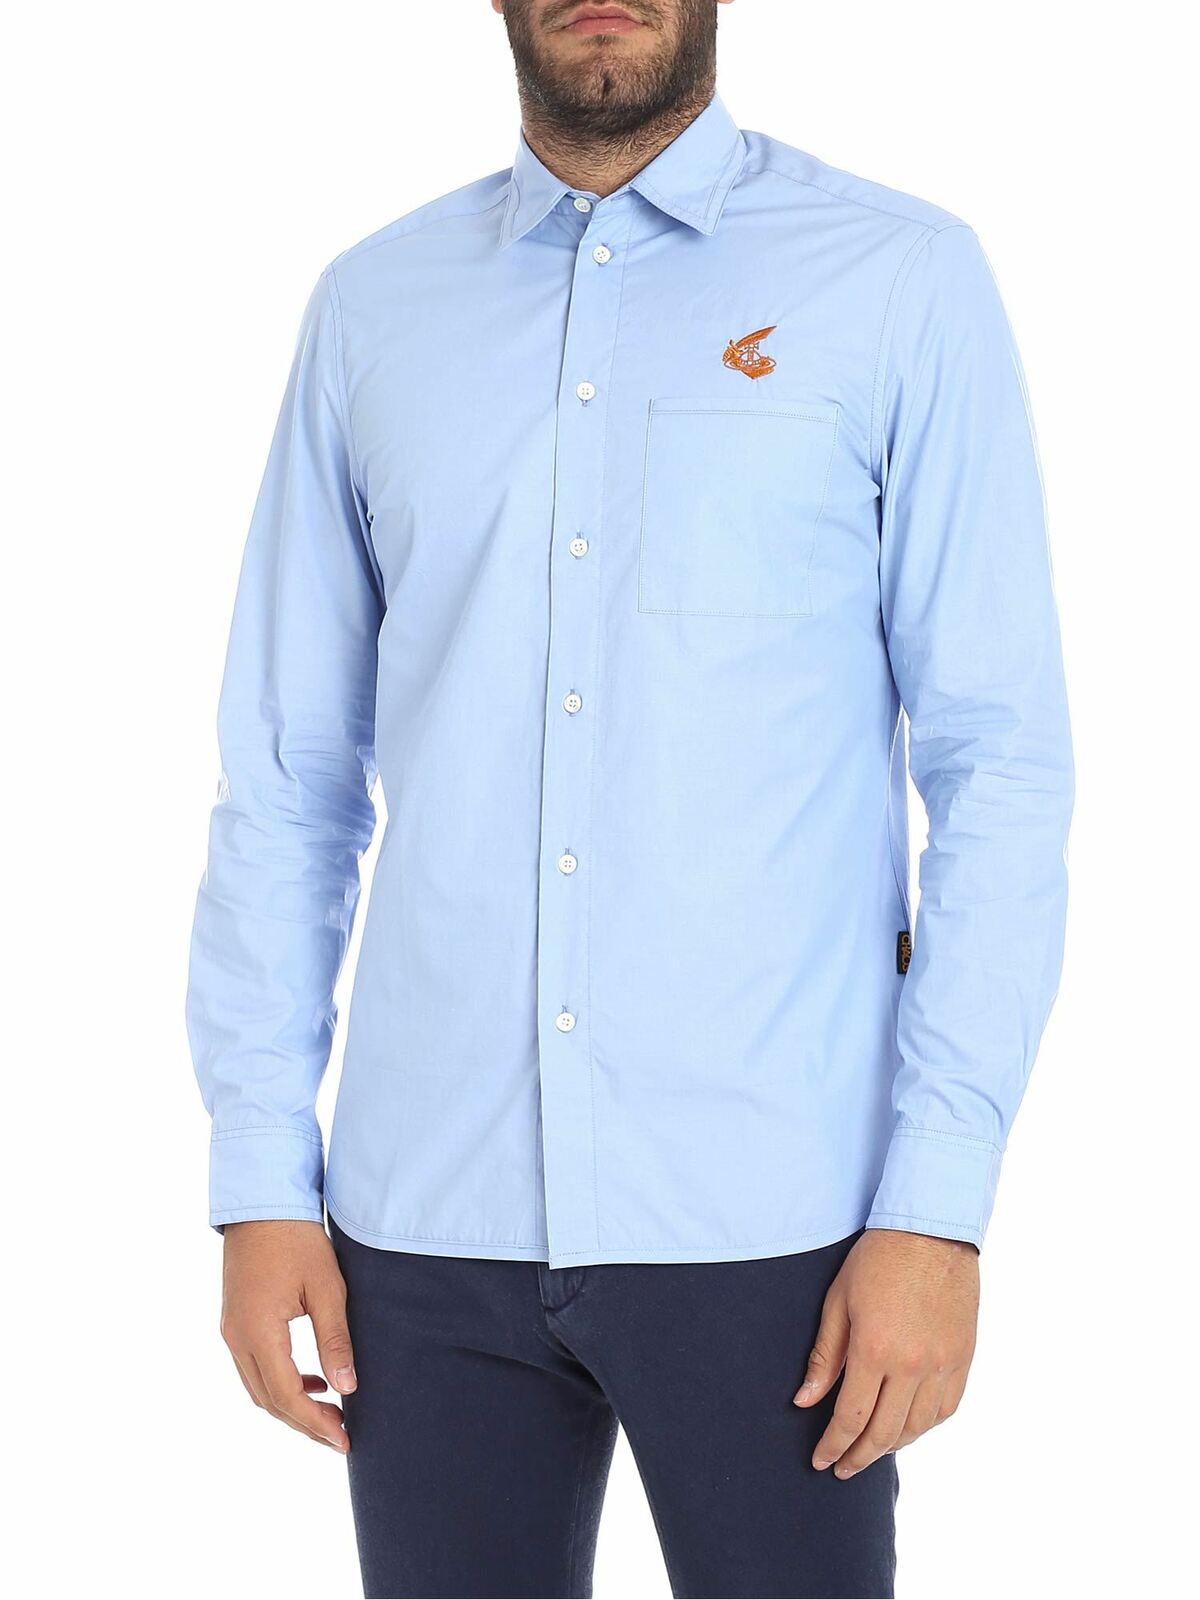 Vivienne Westwood Anglomania Light Blue "chaos" Shirt With Patch Pocket